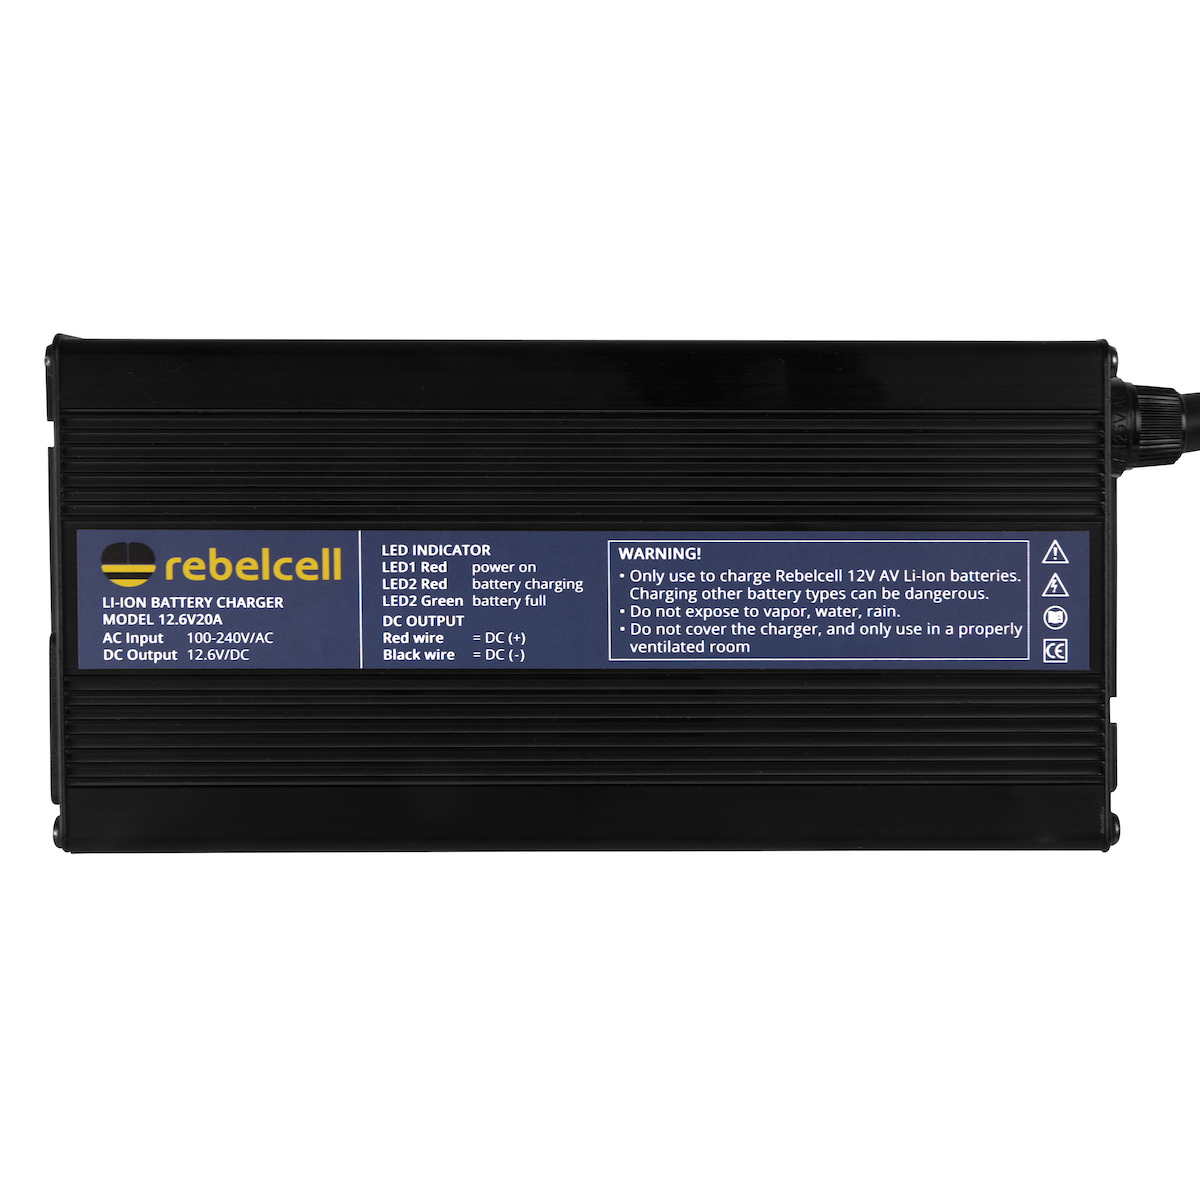 Rebelcell charger 12.6V20A product image